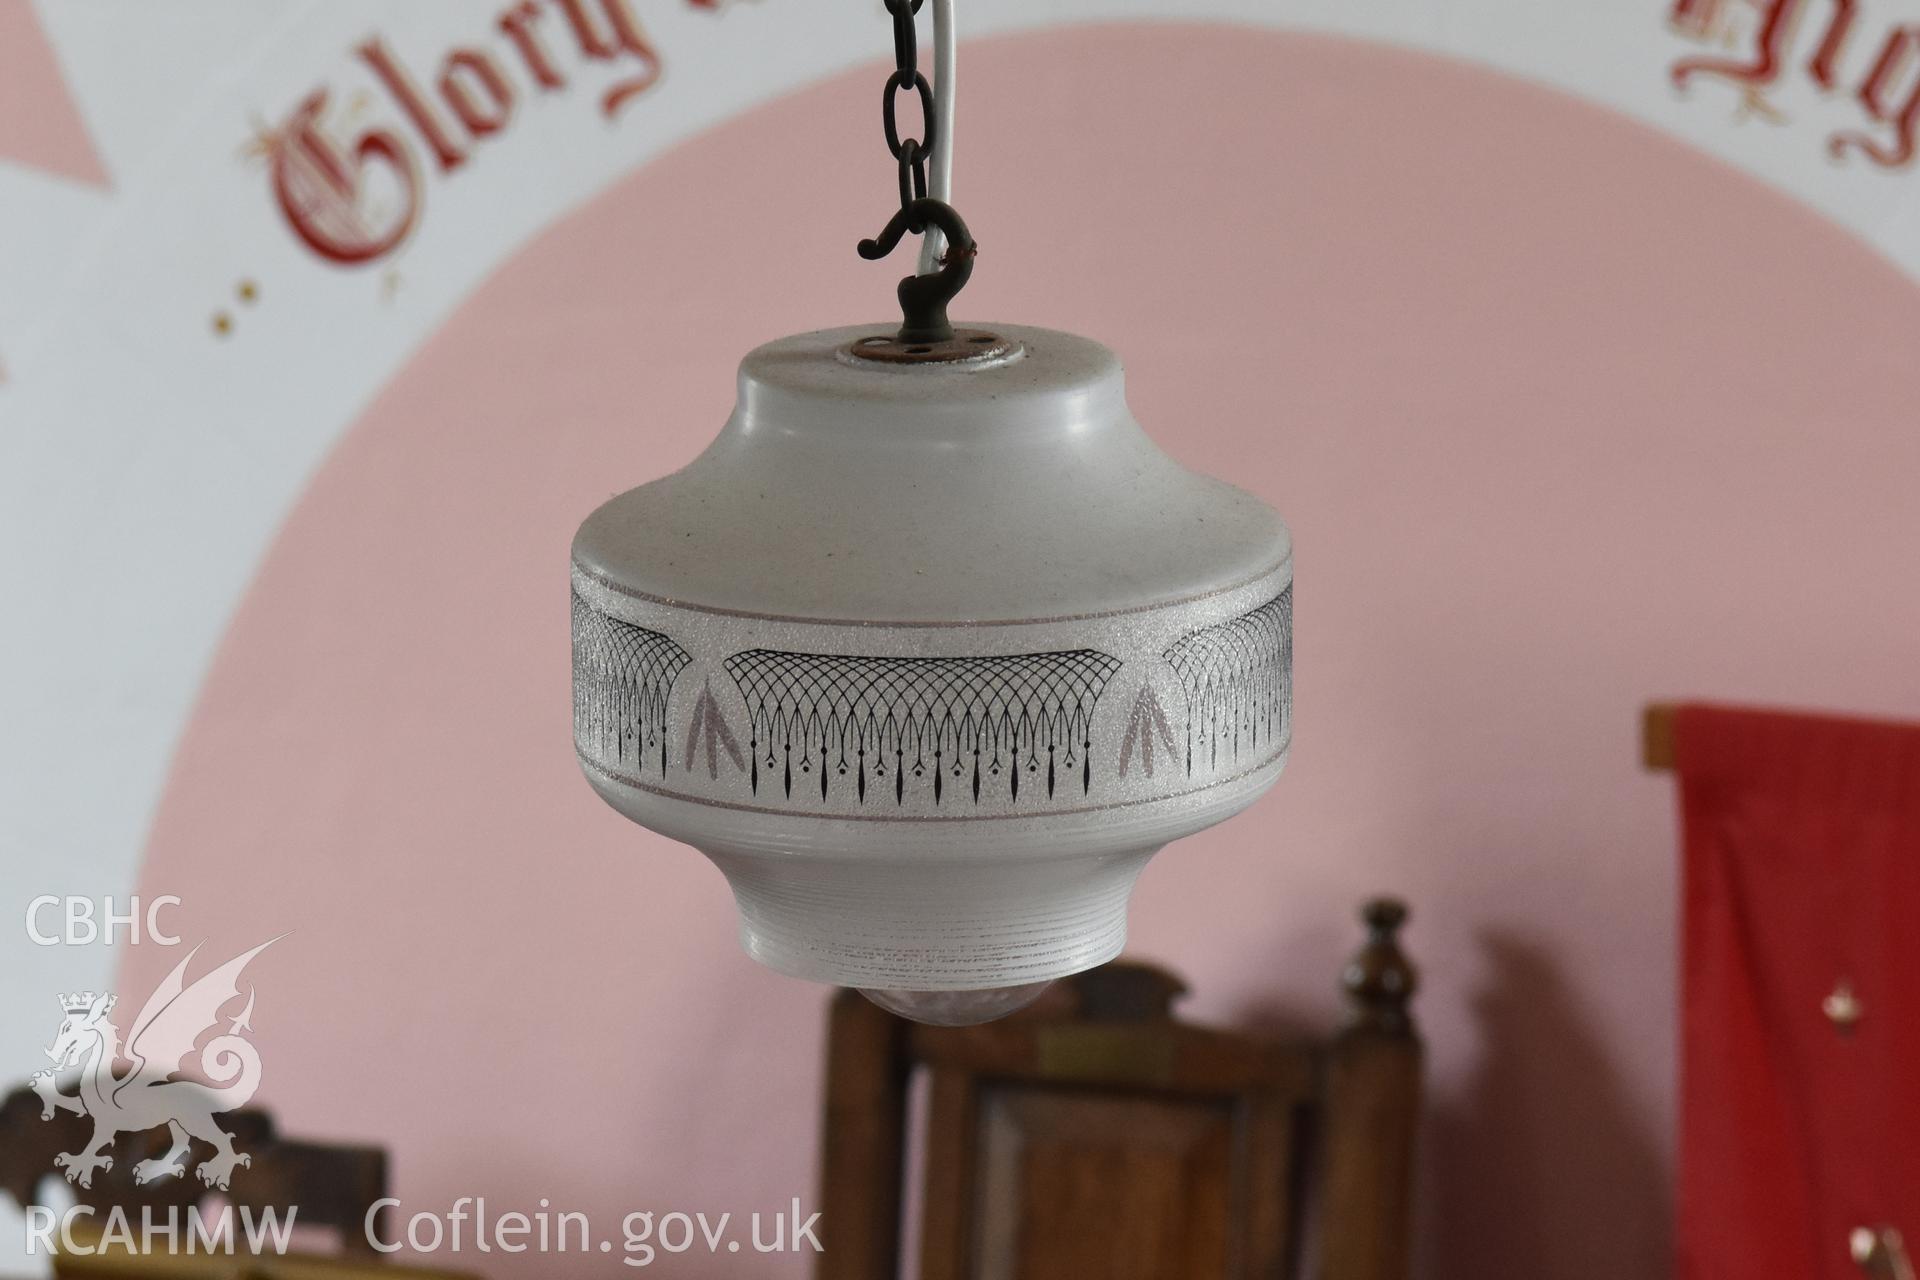 Colour photograph showing detail of lampshade at the Baptist & Unitarian Chapel, Nottage, Porthcawl. Taken during photographic survey conducted by Sue Fielding on 12th May 2018.